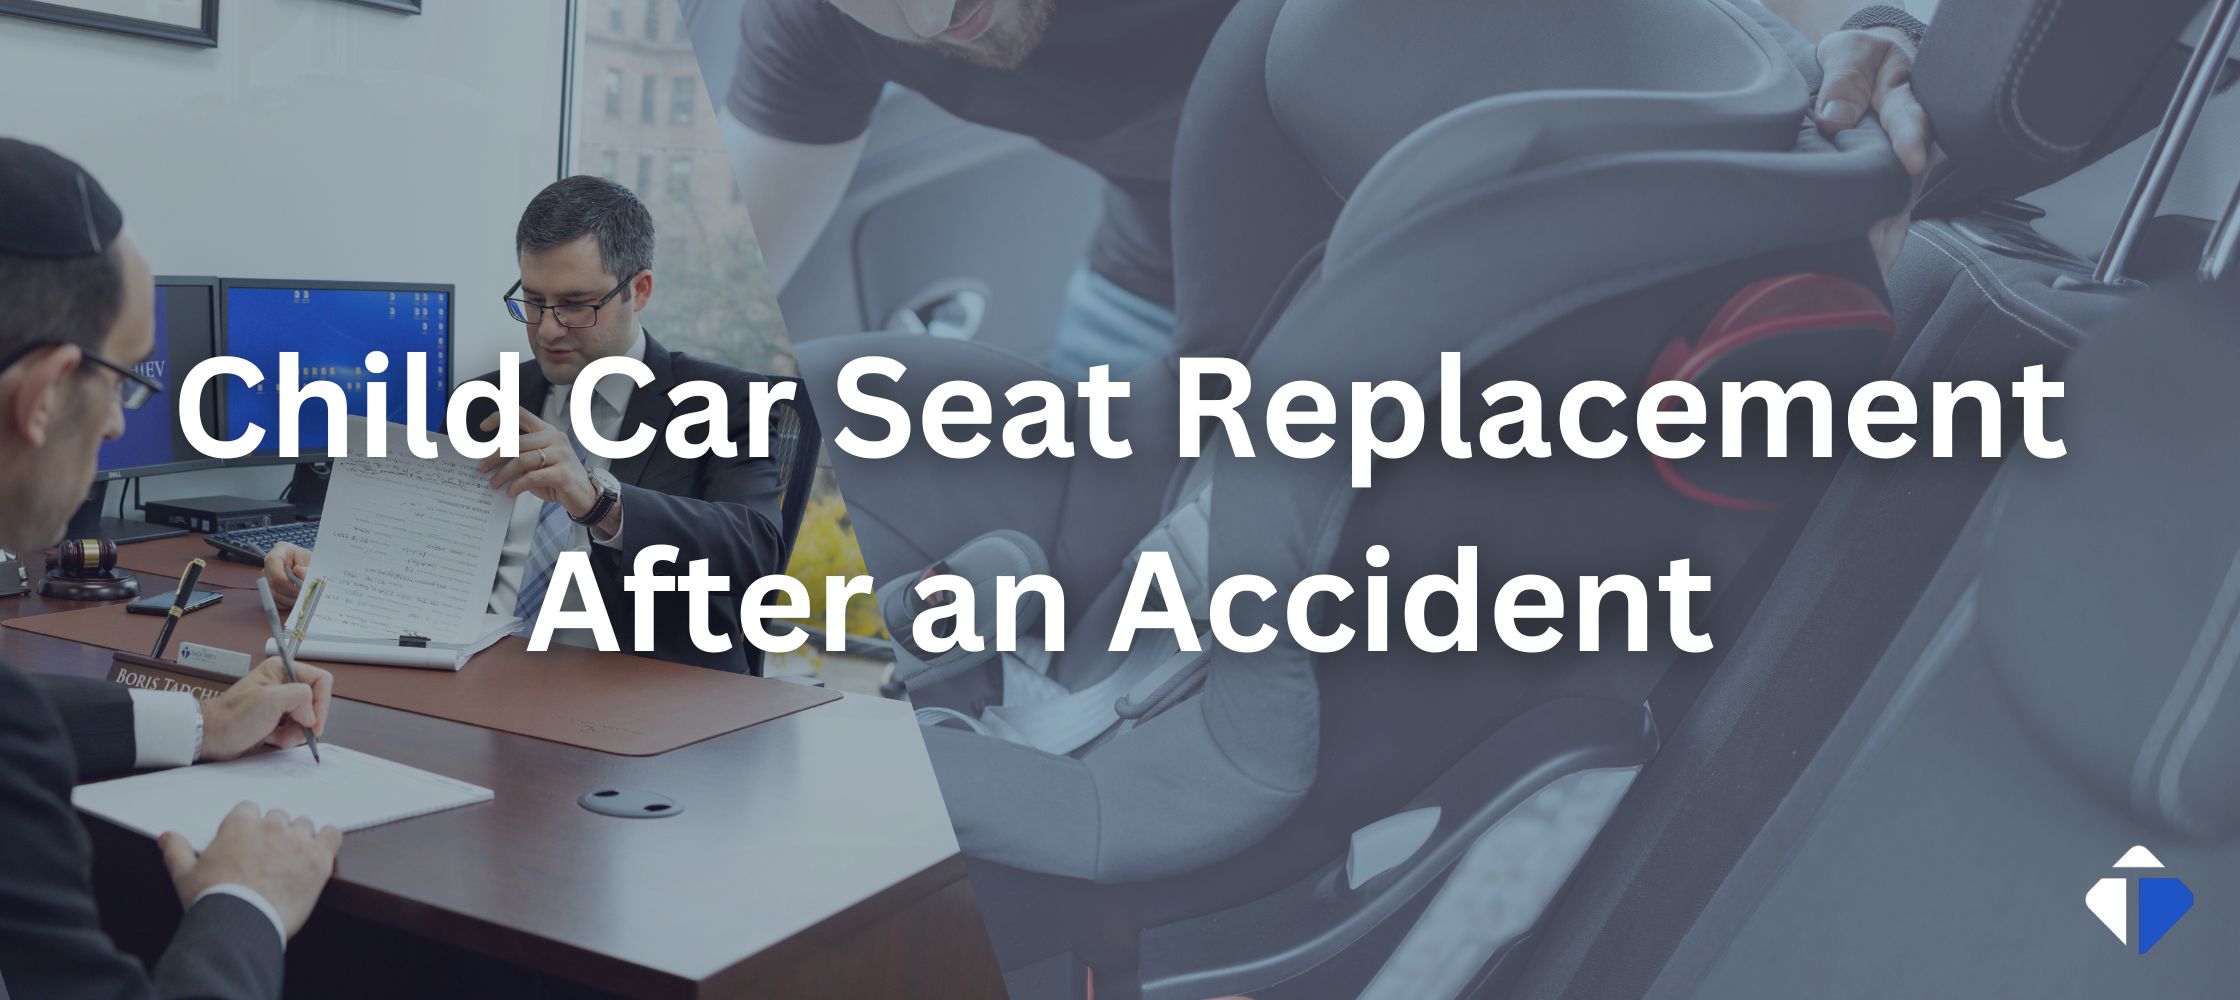 Child Car Seat Replacement After an Accident